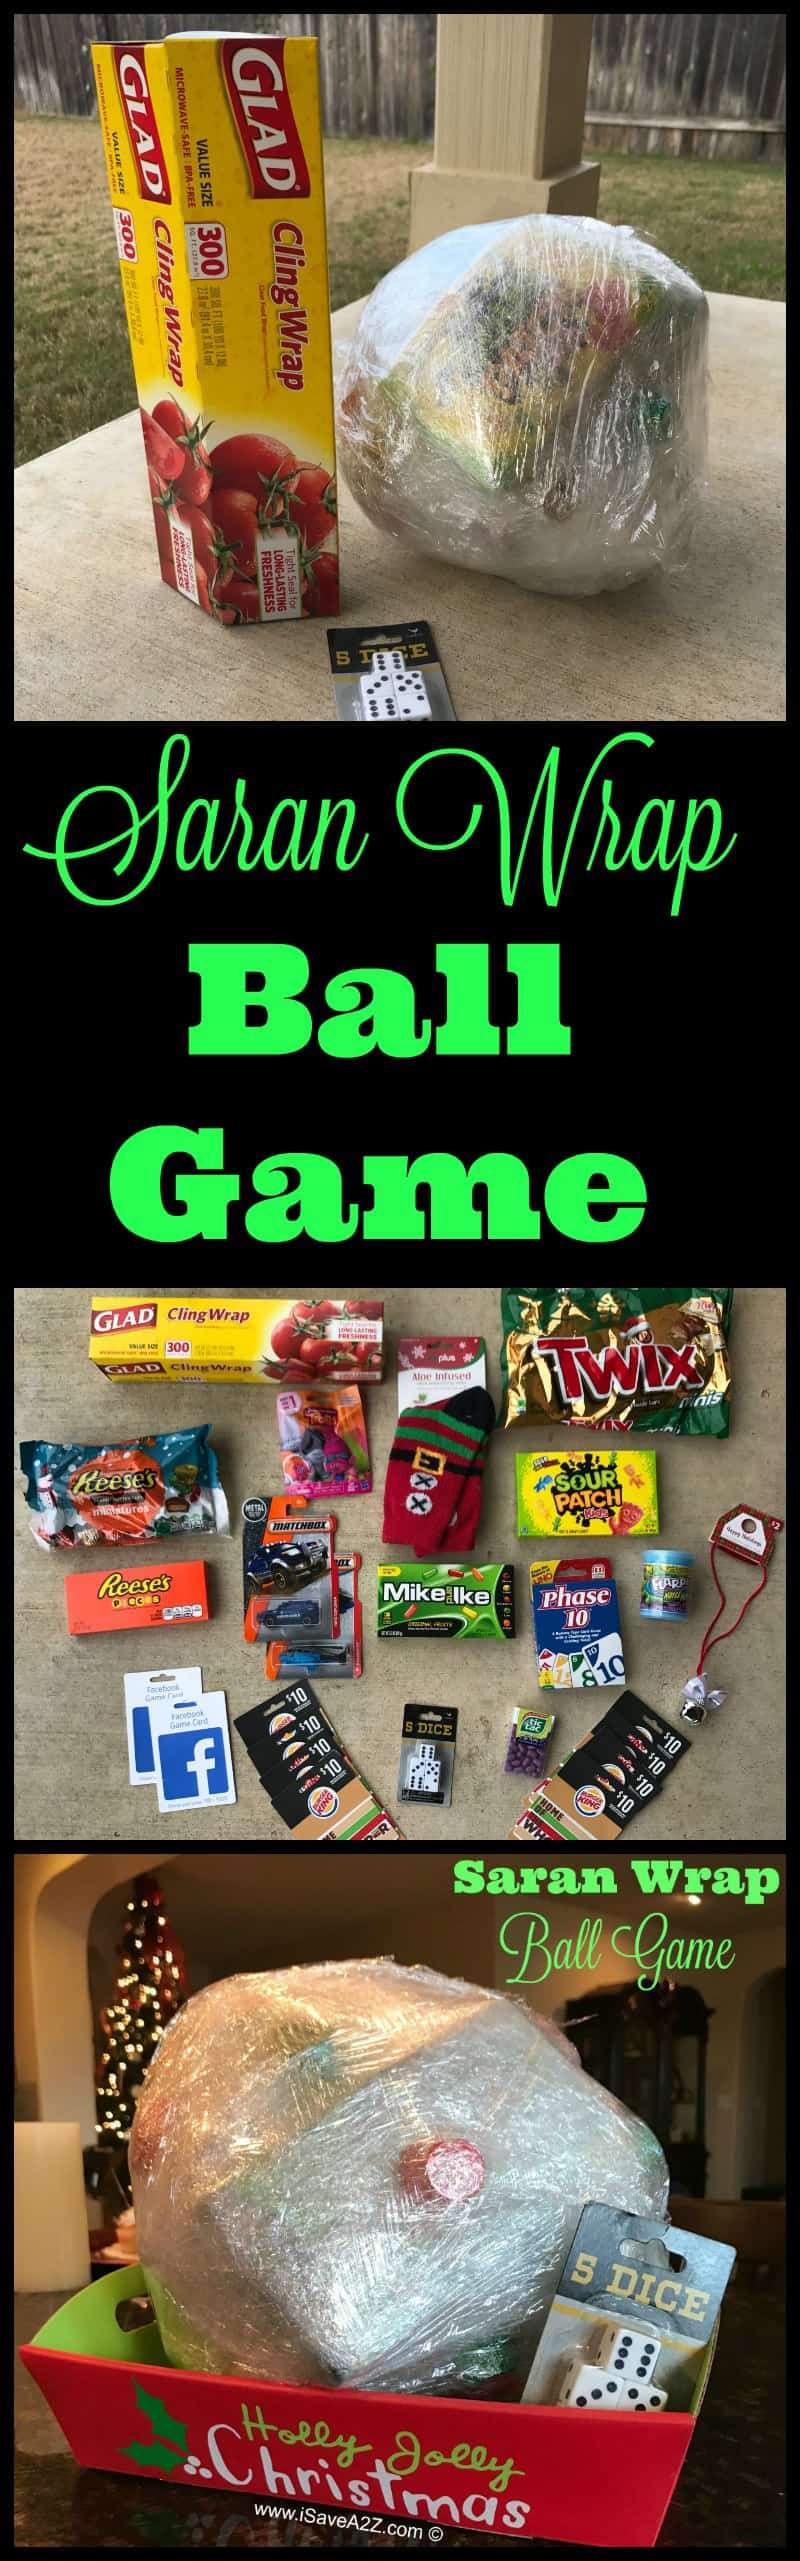 The Saran Wrap Ball Game Rules and Ideas - iSaveA2Z.com 